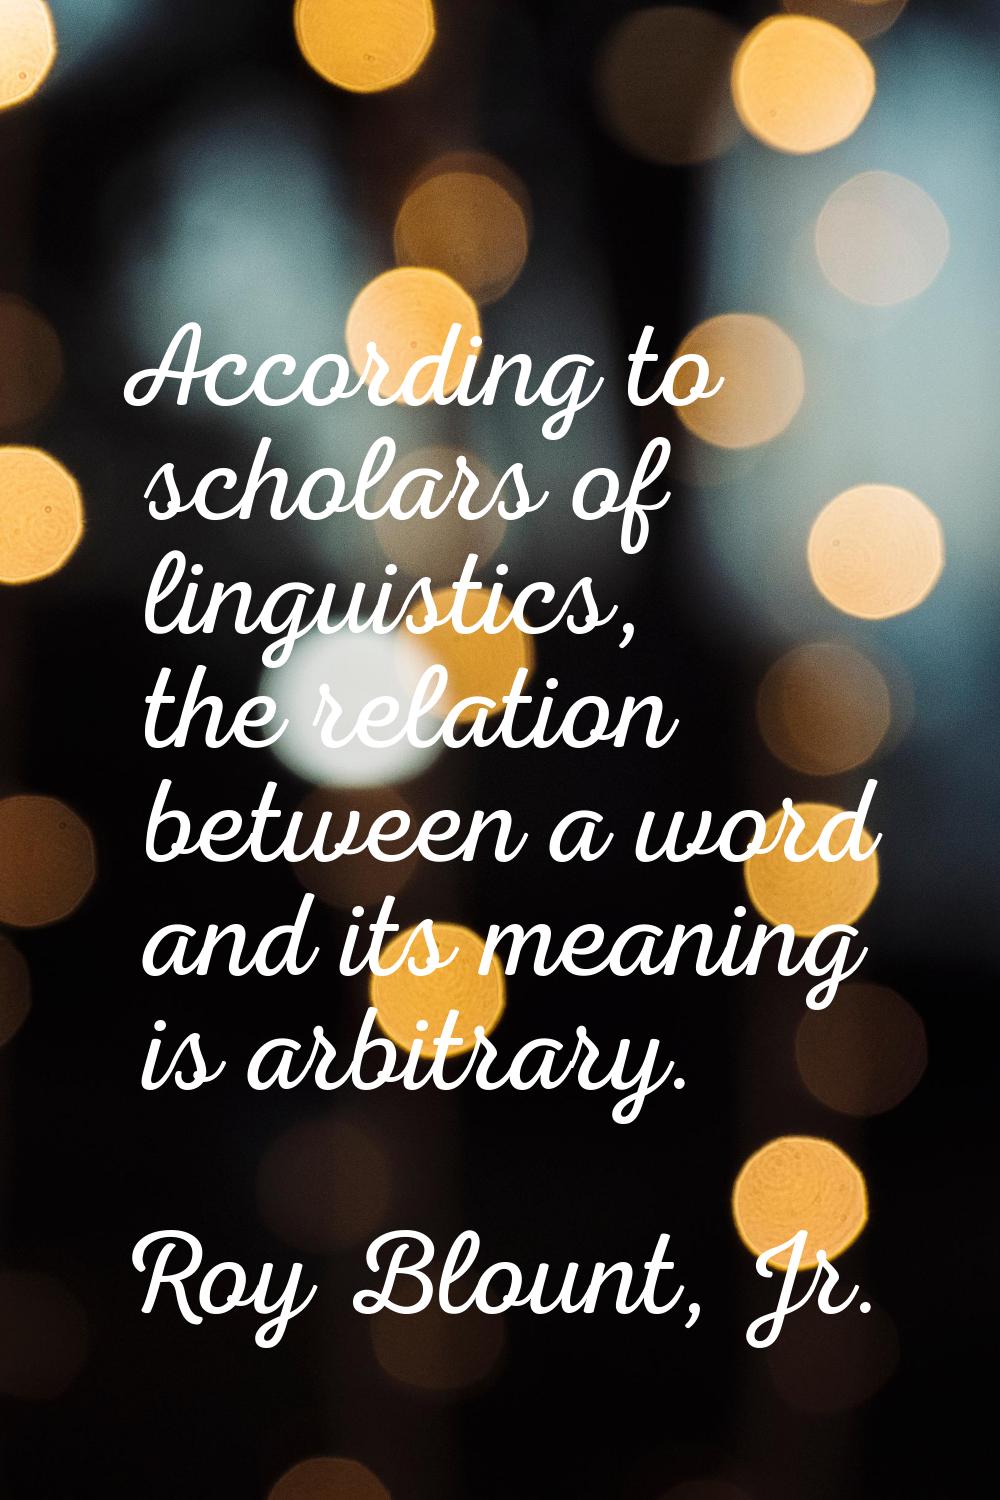 According to scholars of linguistics, the relation between a word and its meaning is arbitrary.